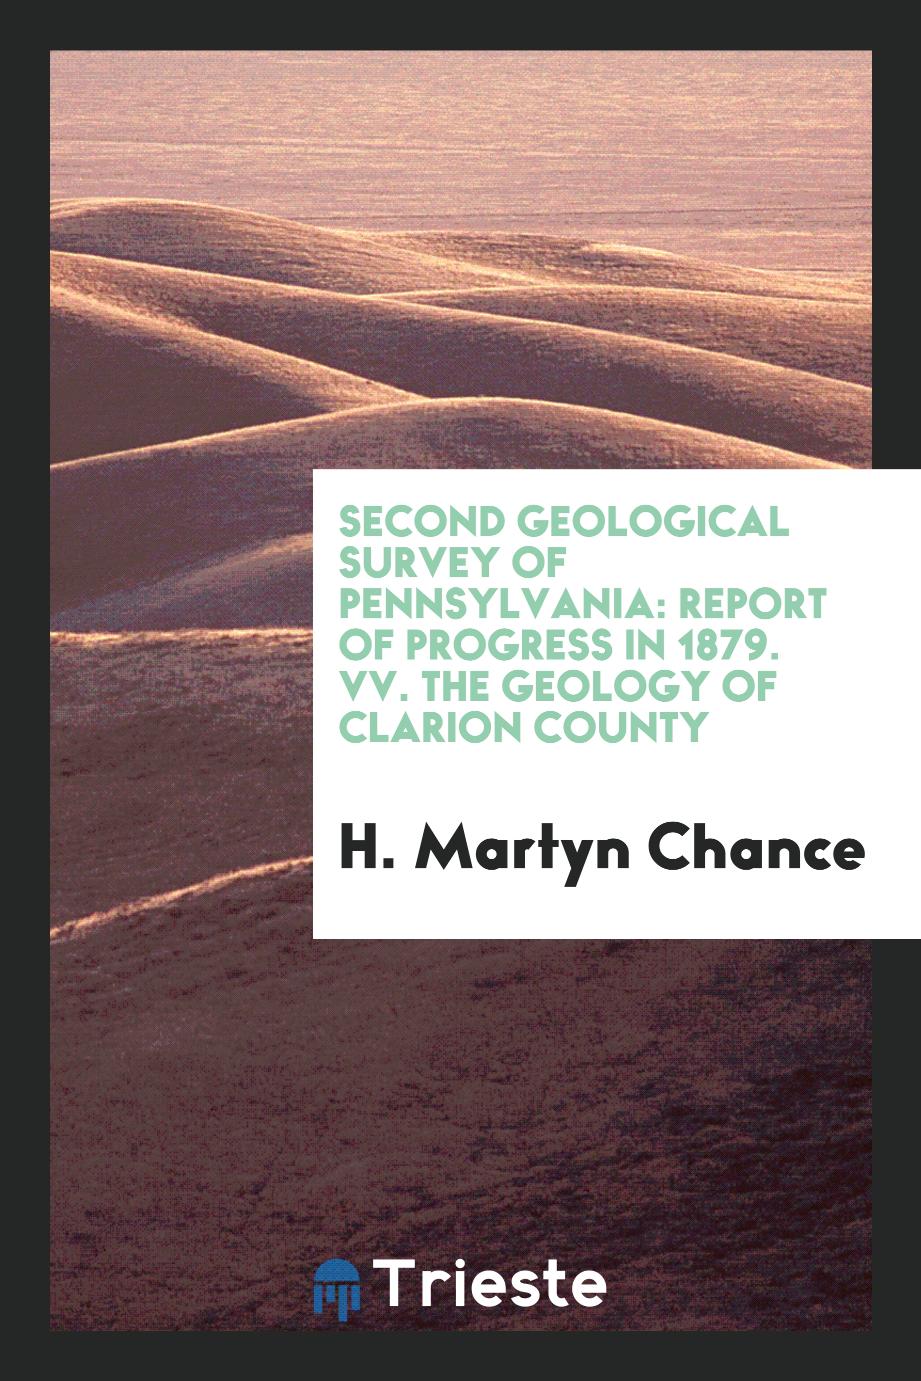 Second Geological Survey of Pennsylvania: Report of Progress in 1879. Vv. The Geology of Clarion County